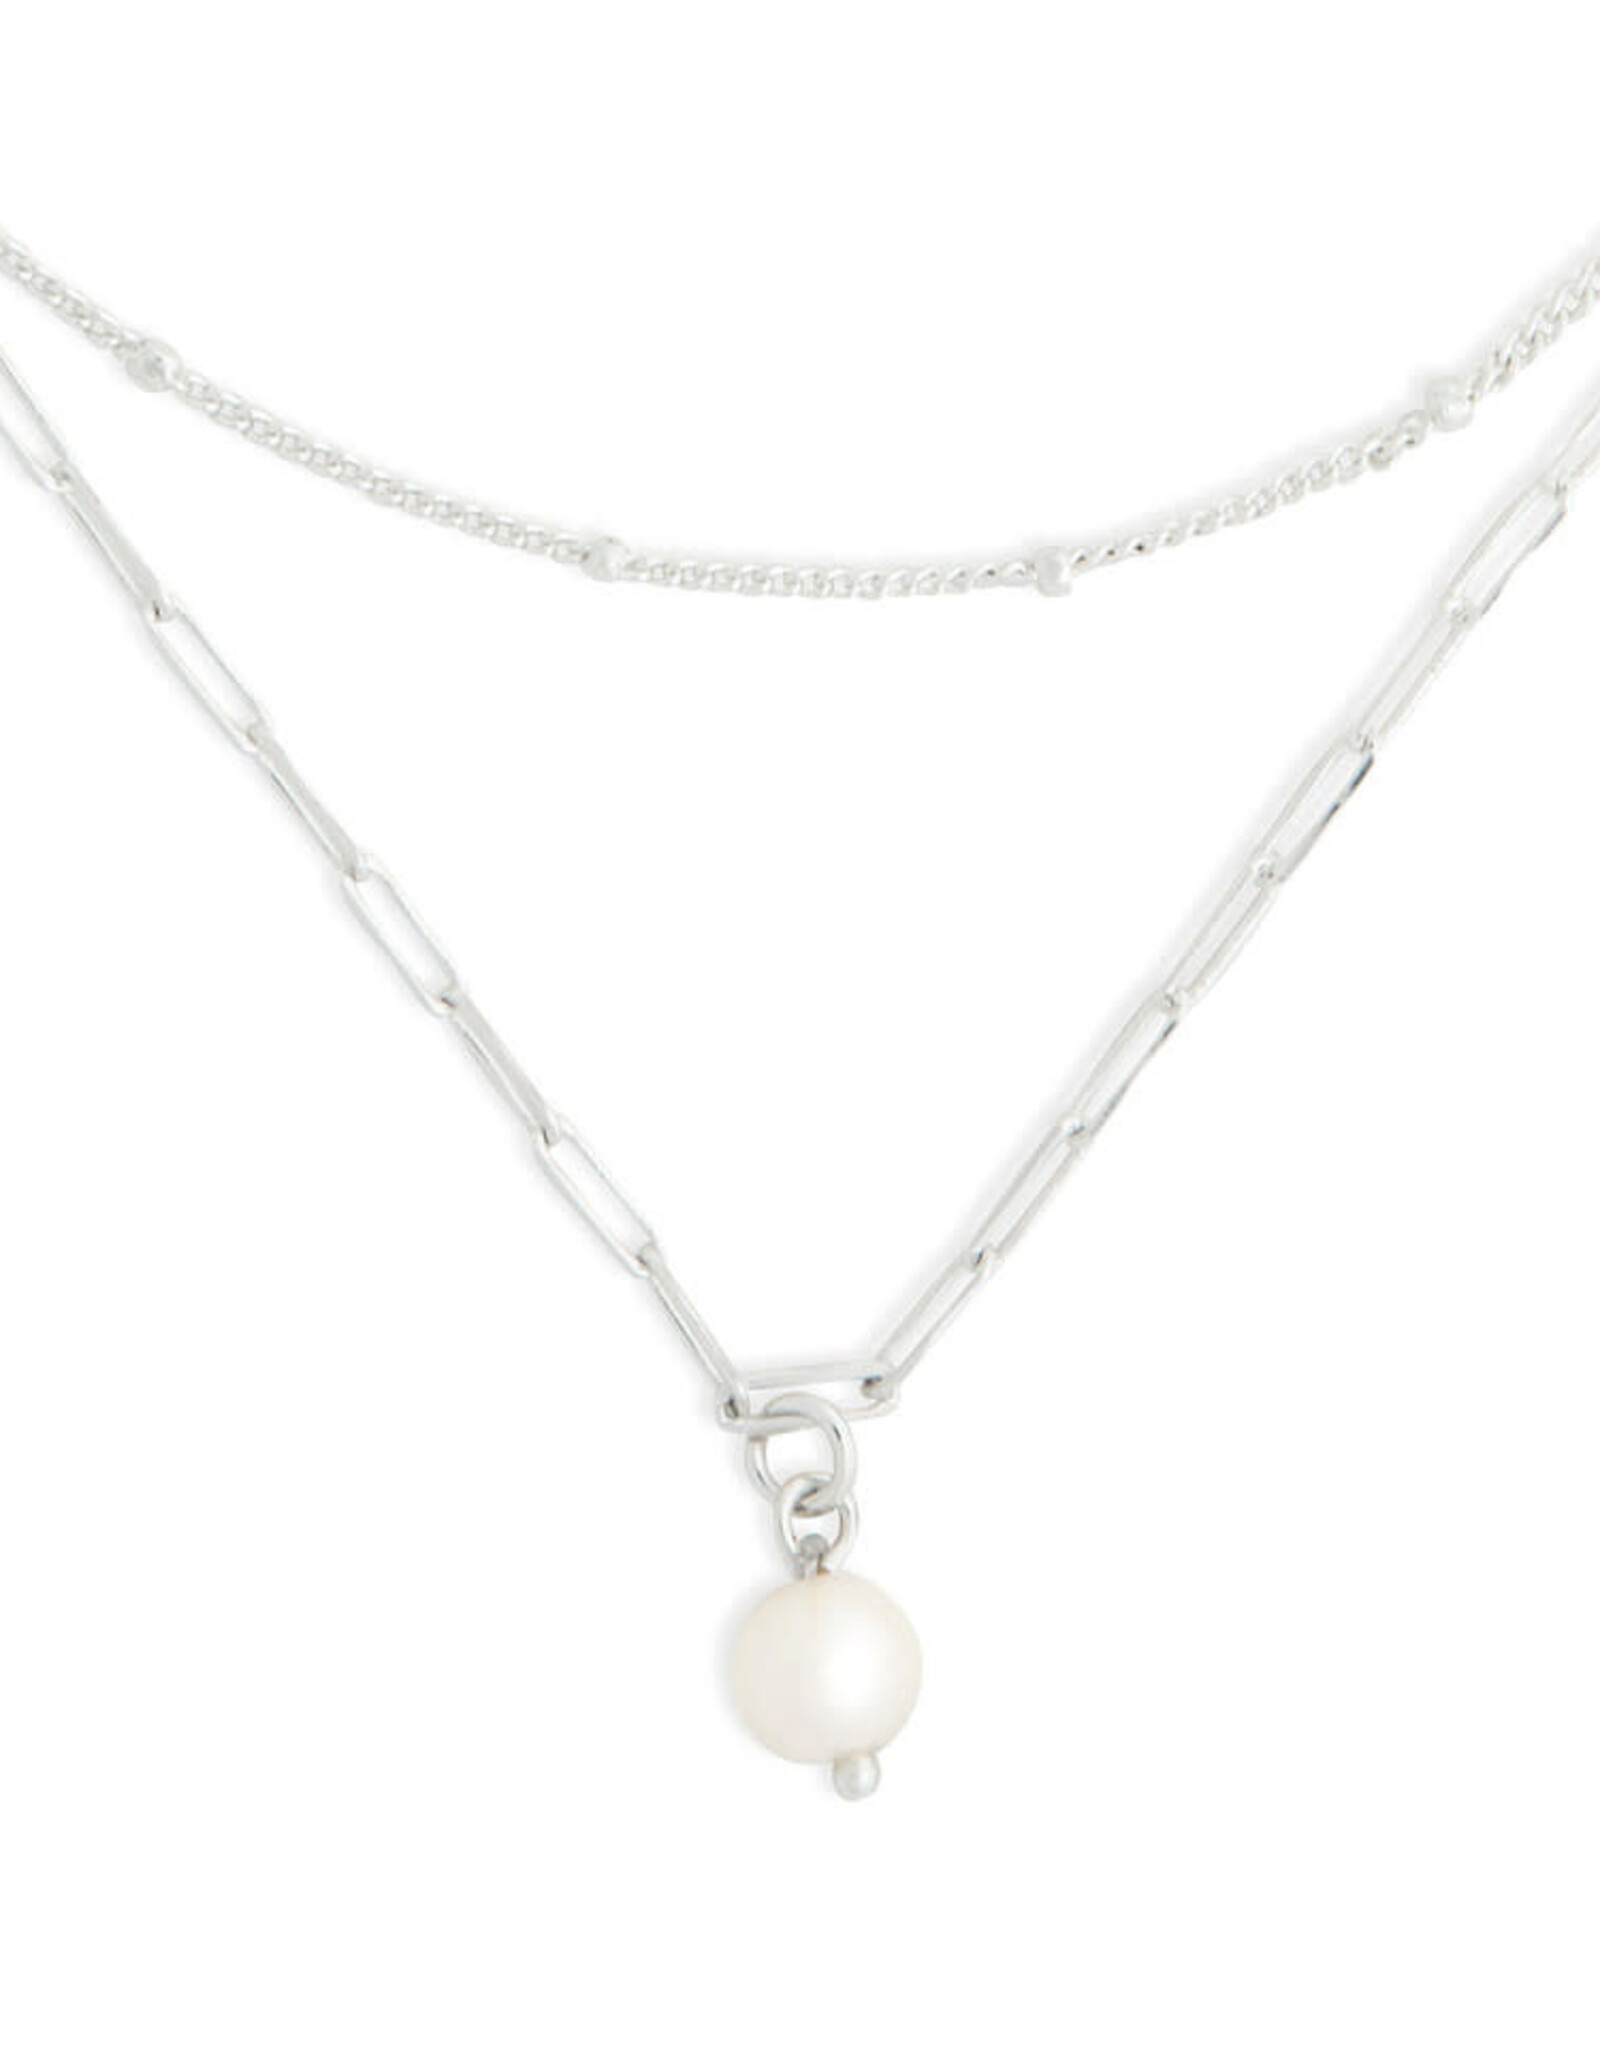 Demdaco PEARLS FROM WITHIN JEWELRY COLLECTION - gifting jewelry